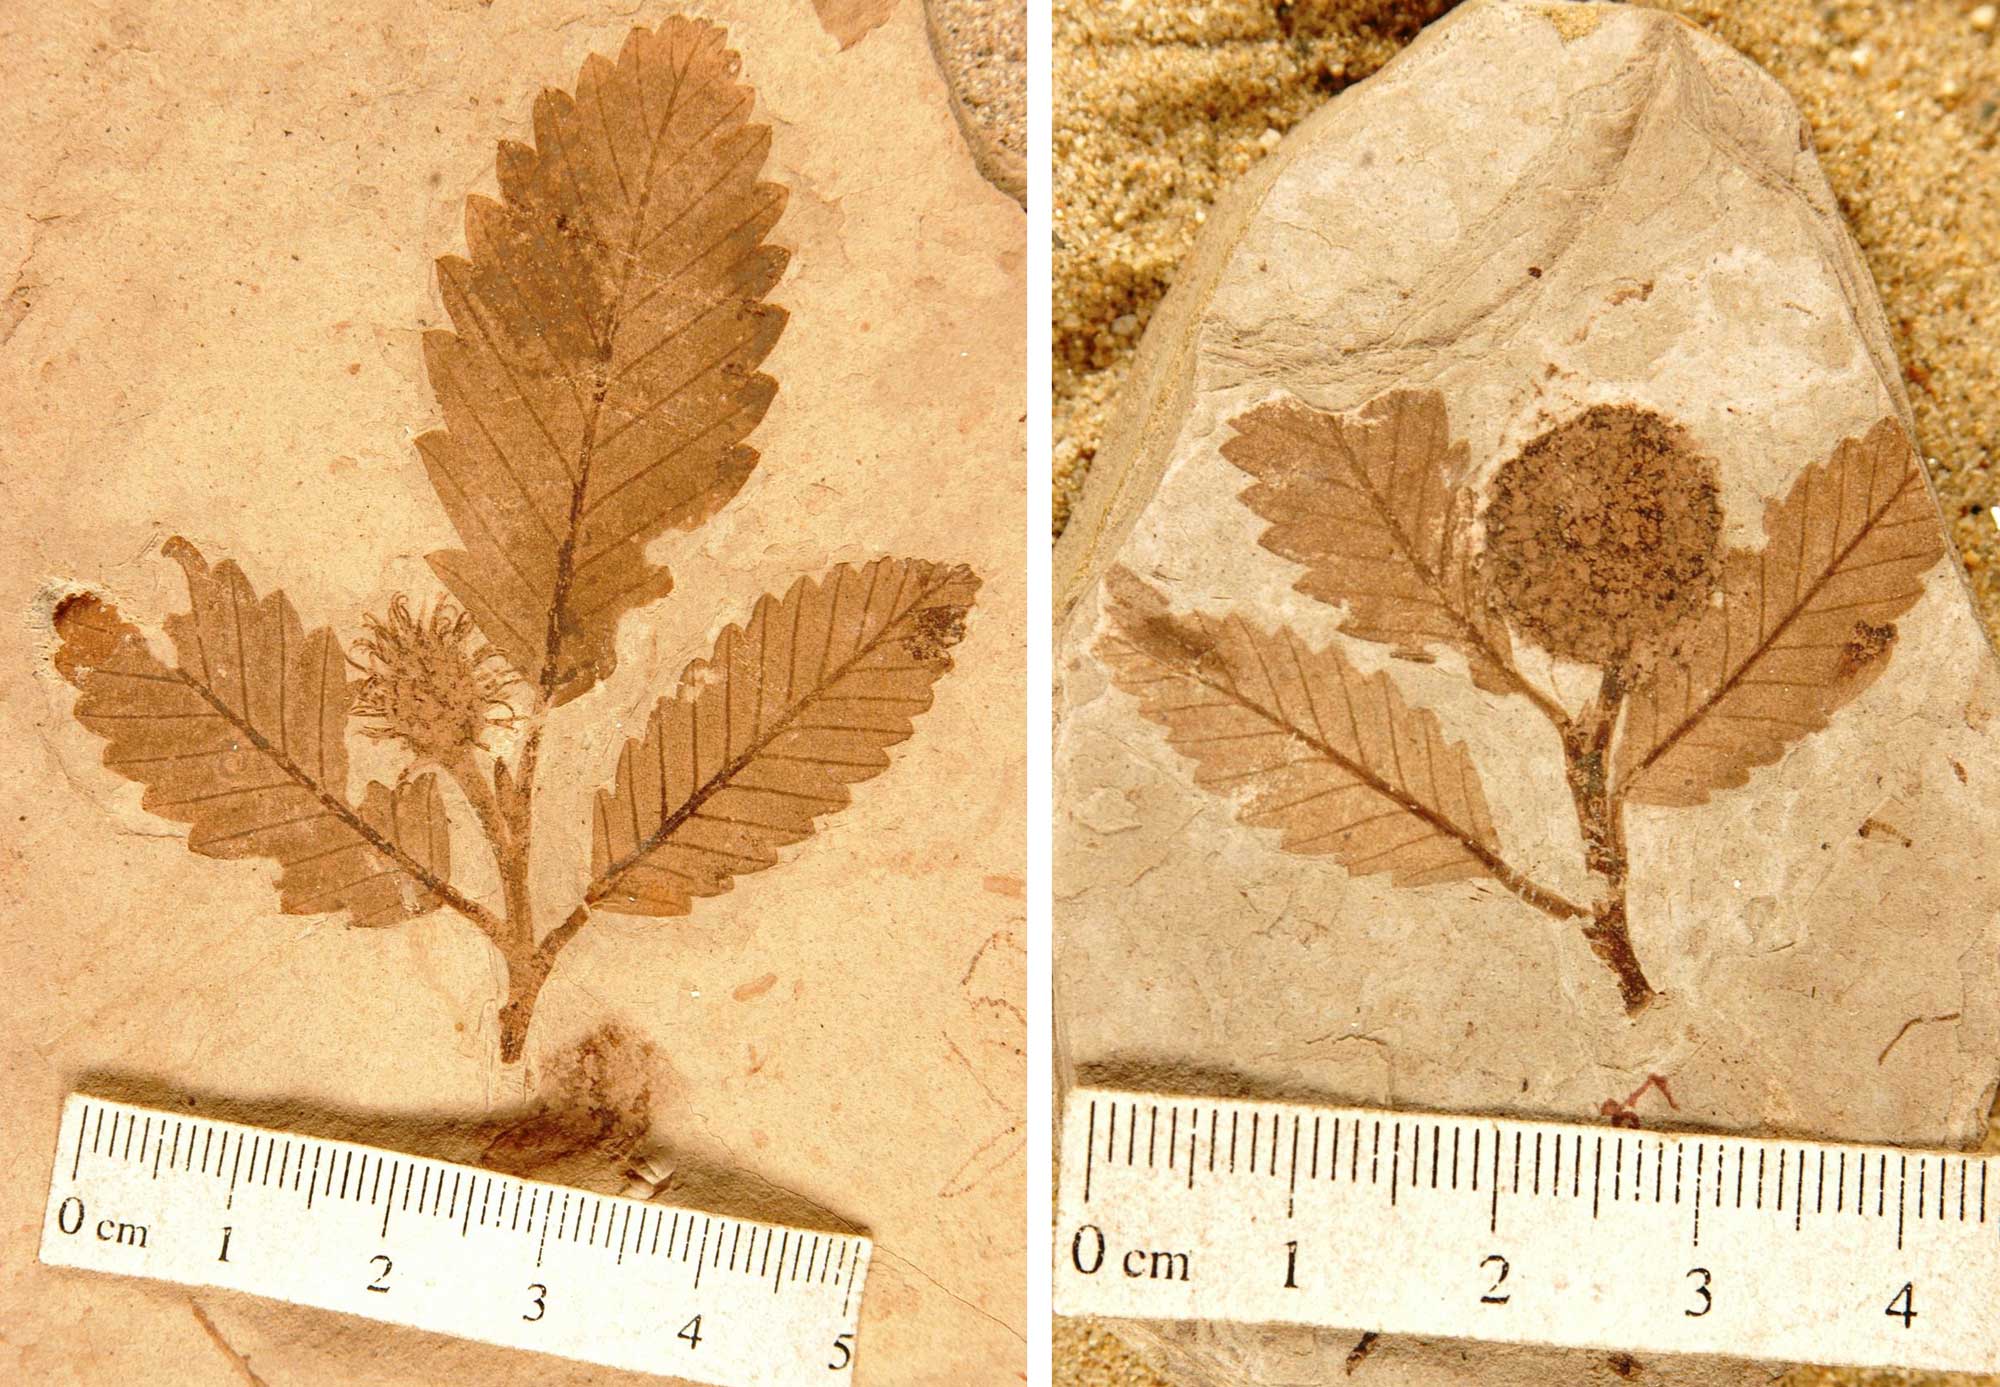 2-panel image showing fossil branches of Fagopsis, a tree in the beech family. Both photos show a small branch with alternating simple leaves that have pinnate venation and toothed margins. The image on the left also shows a female reproductive structure, which looks like a spiky ball. The image on the right shows a male reproductive structure, which looks like a round, fuzzy ball.